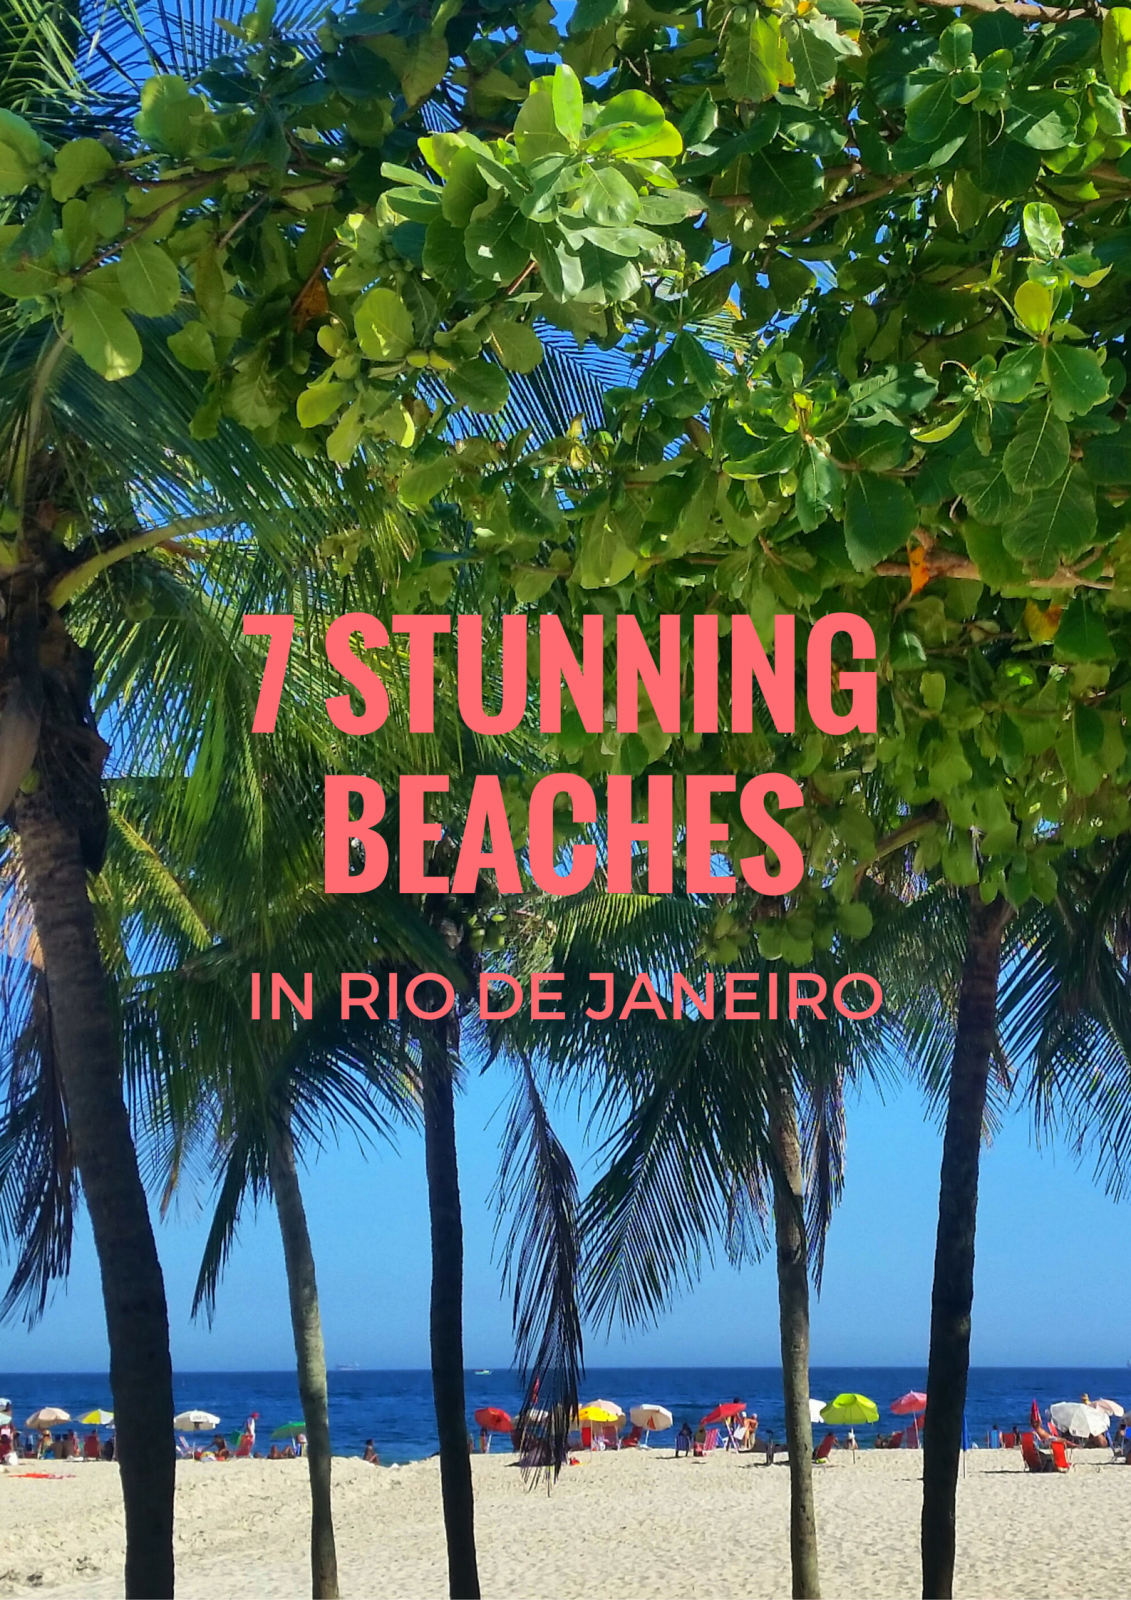 One thing Brazil is so famous for is it's incredible beaches! And of course, the beaches of Rio de Janeiro are on the top of the list! If you are planning a trip to Brazil, here are 7 stunning beaches in Rio you can't miss...